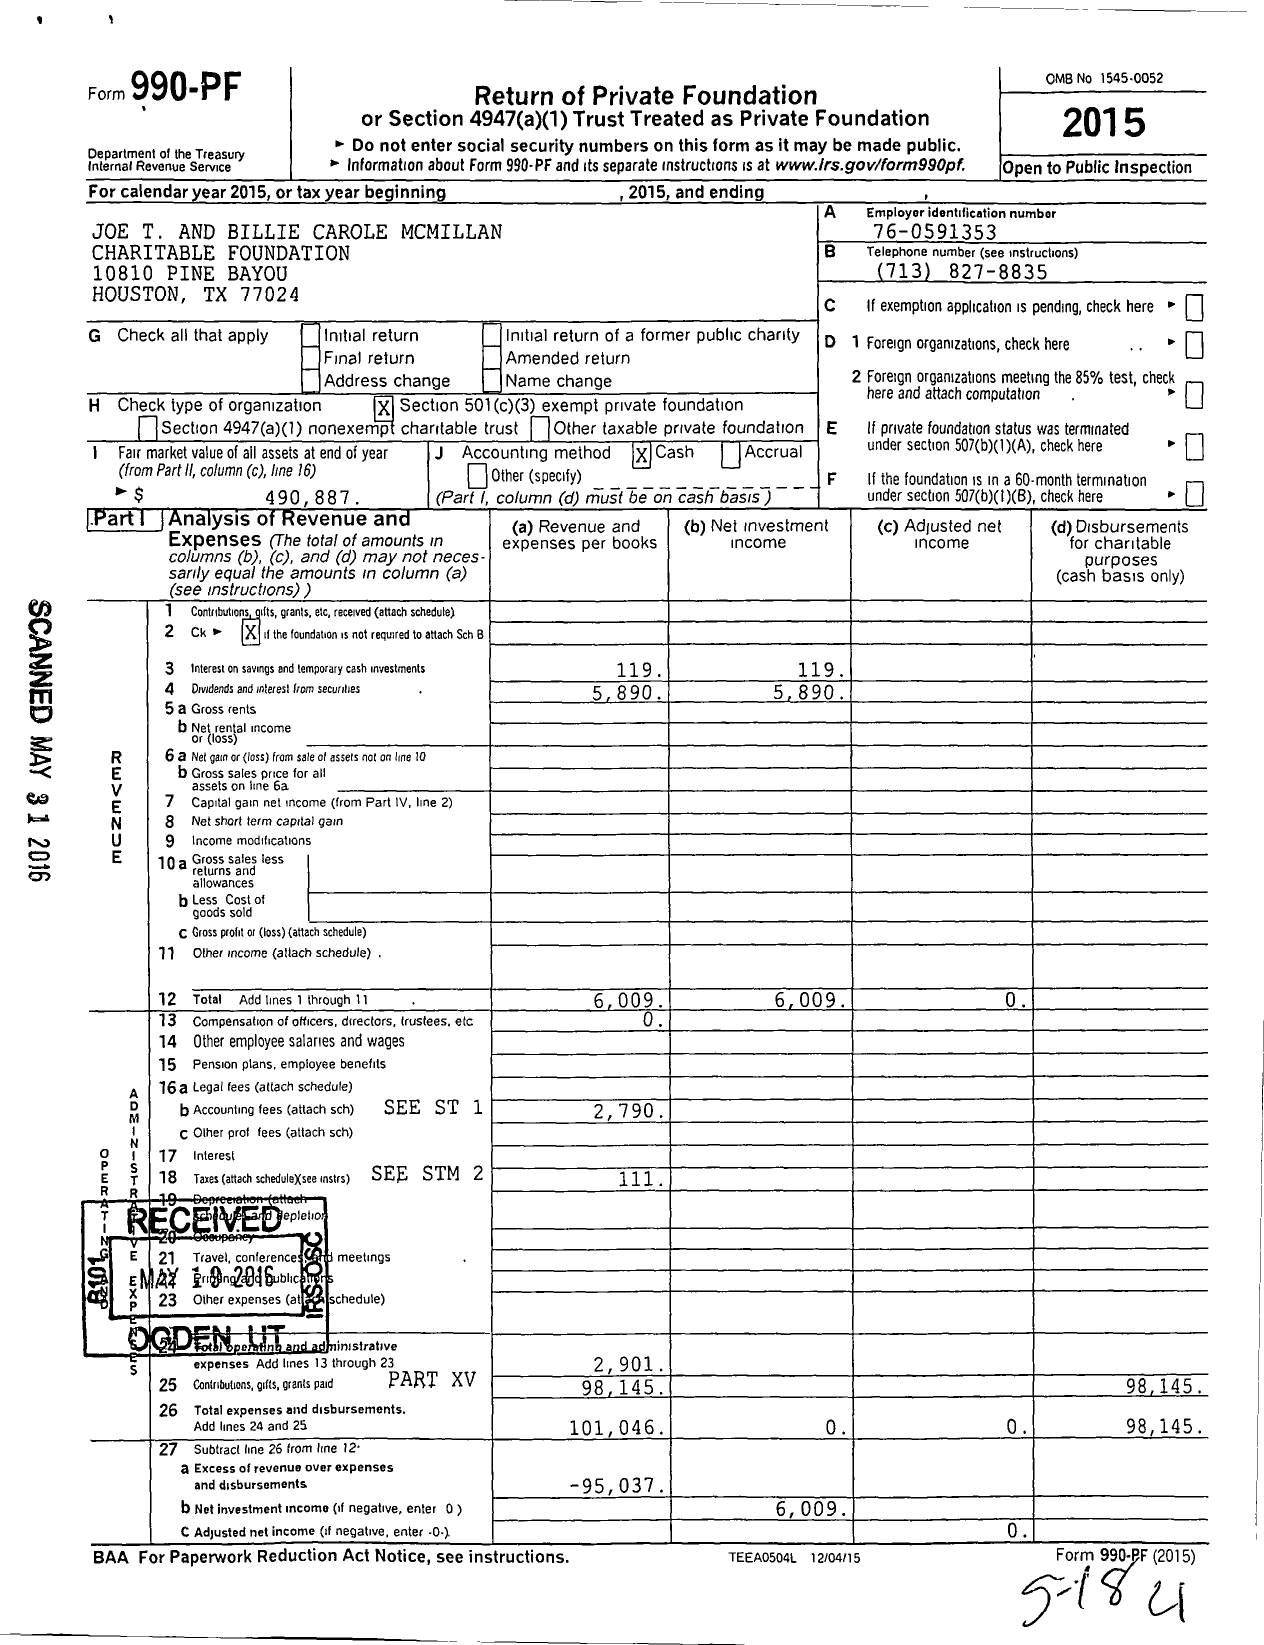 Image of first page of 2015 Form 990PF for Joe T and Billie Carole Mcmillan Charitable Foundation